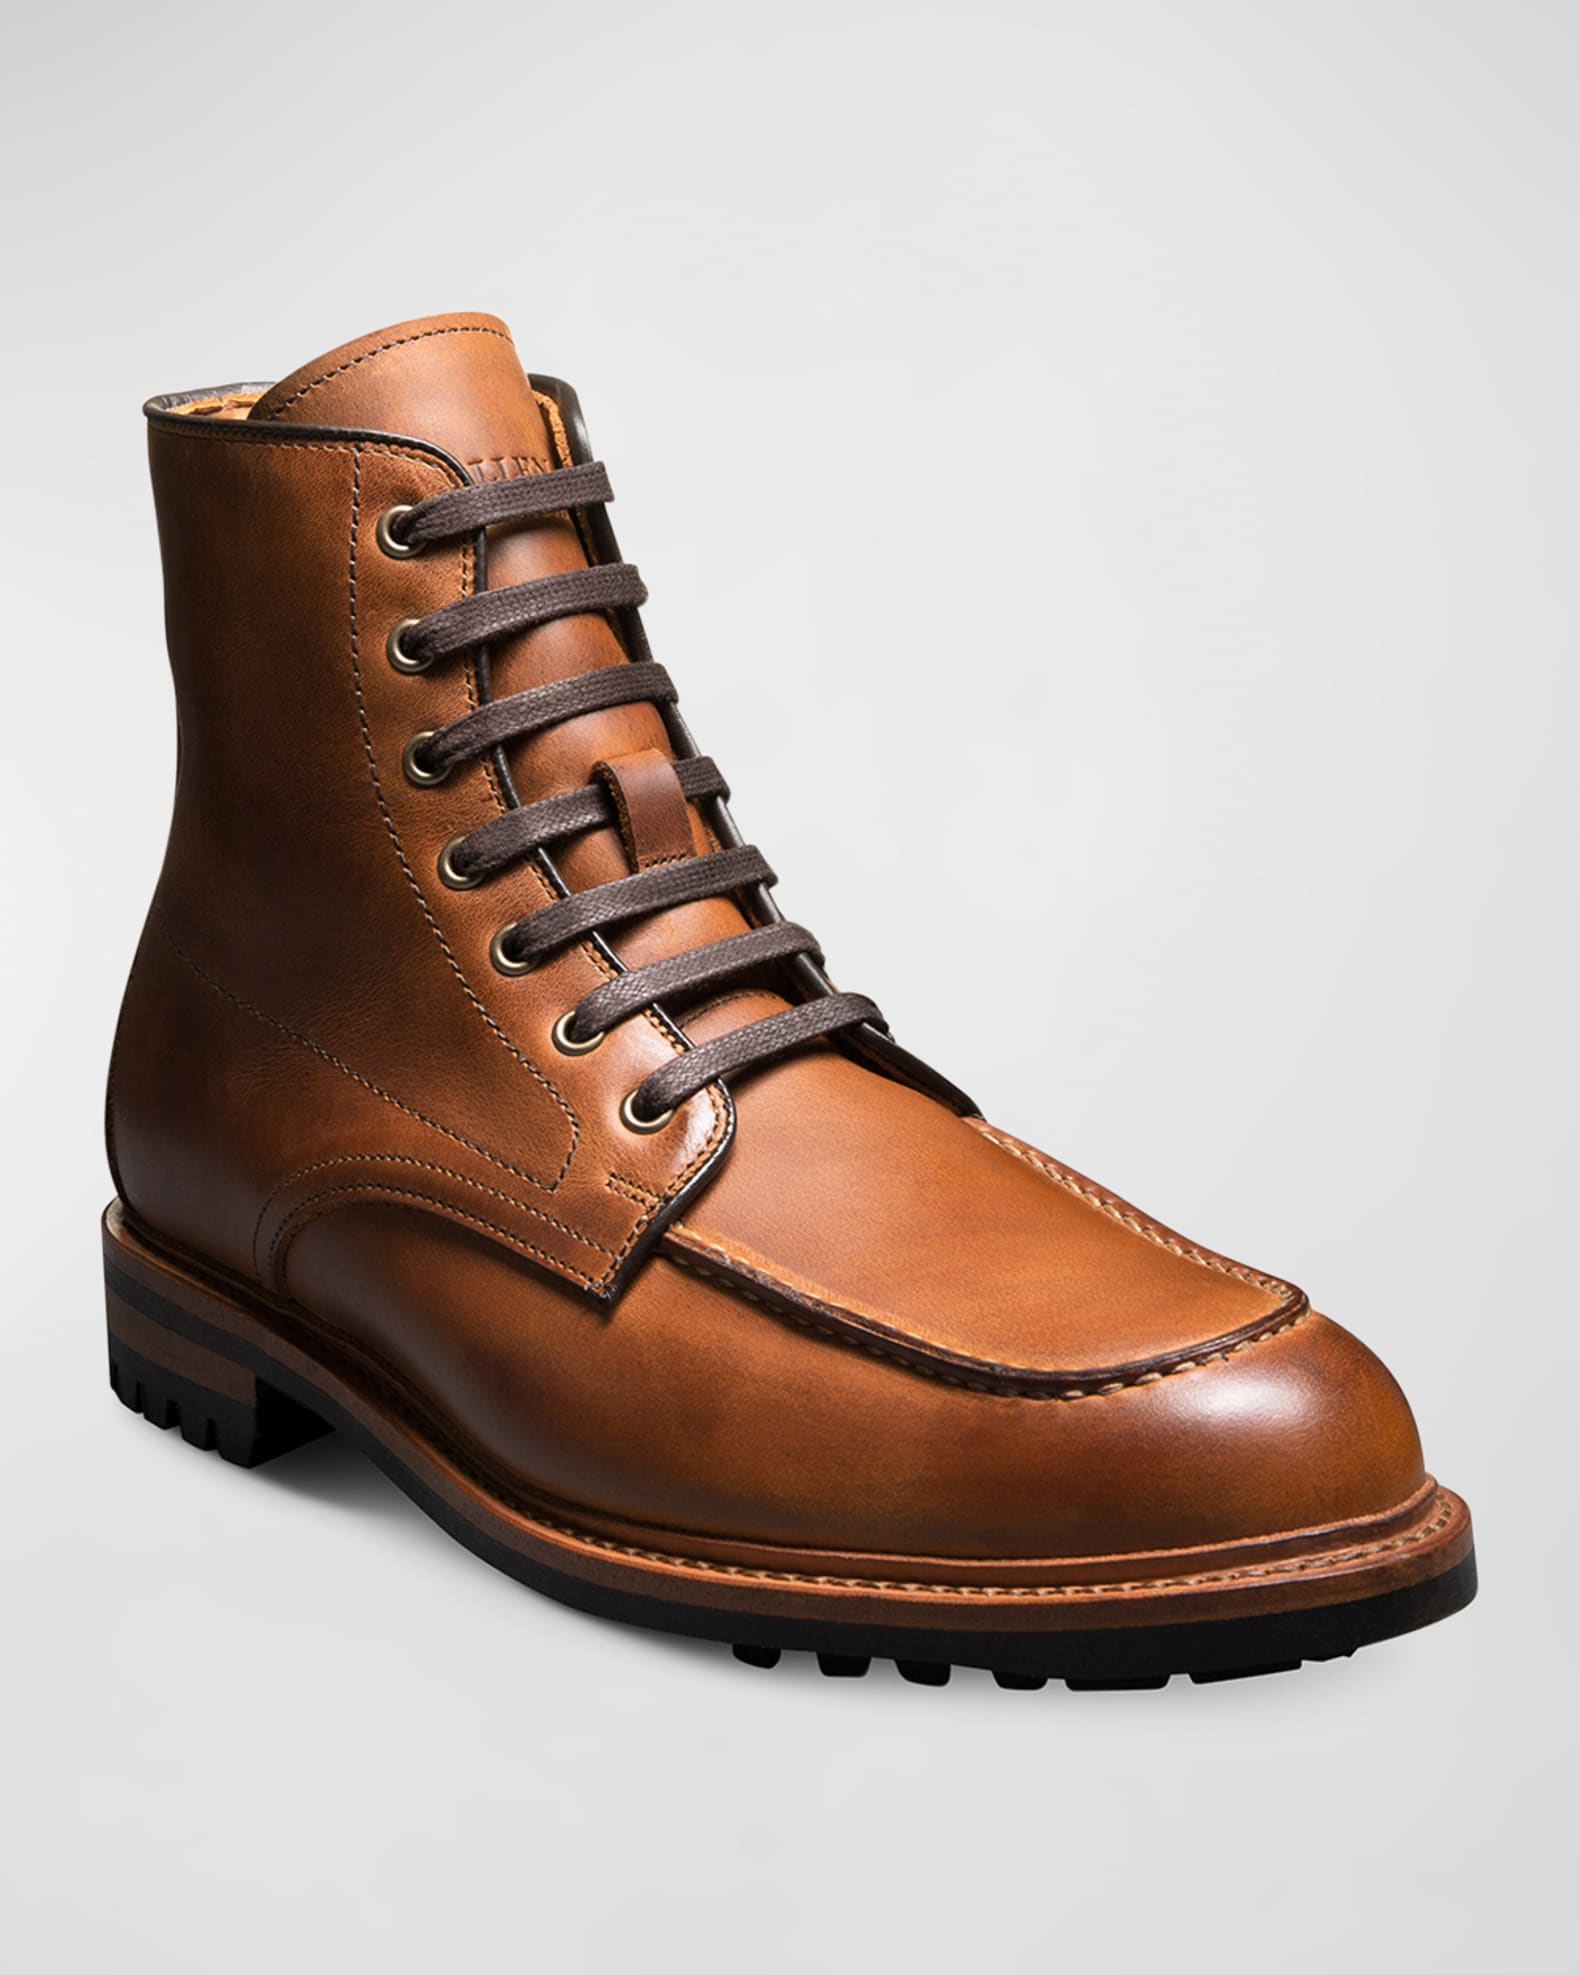 Leather laces - Carter's Boots and Repair